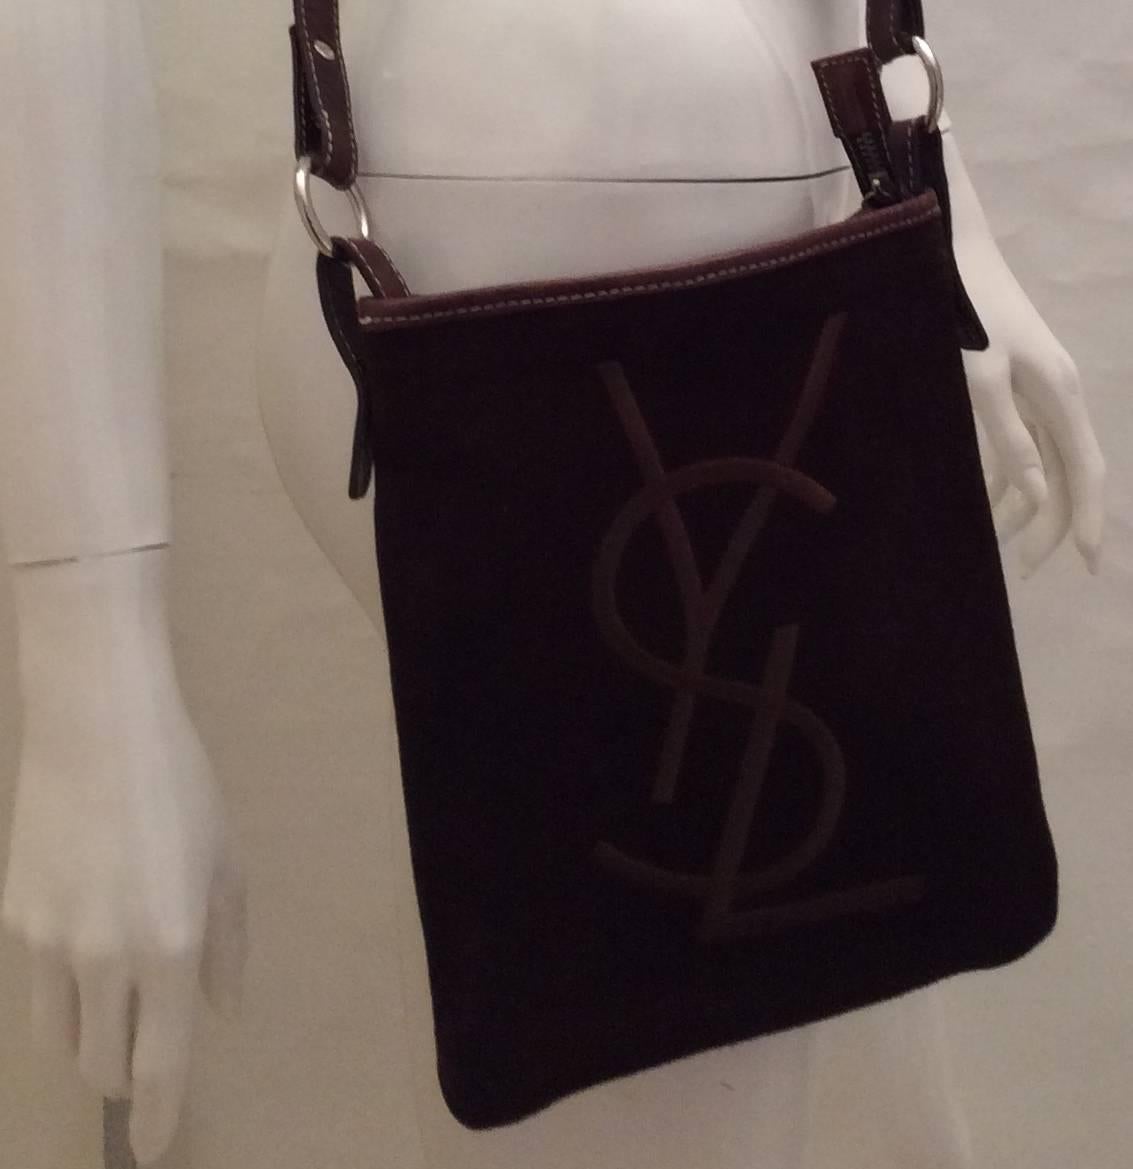 Presented here is an Yves Saint Laurent cross body bag. The bag is brown suede with smooth brown leather trim. There is a large embroidered 'YSL' emblem on the front of the bag. There is white stitching on the bag. The interior lining is an animal